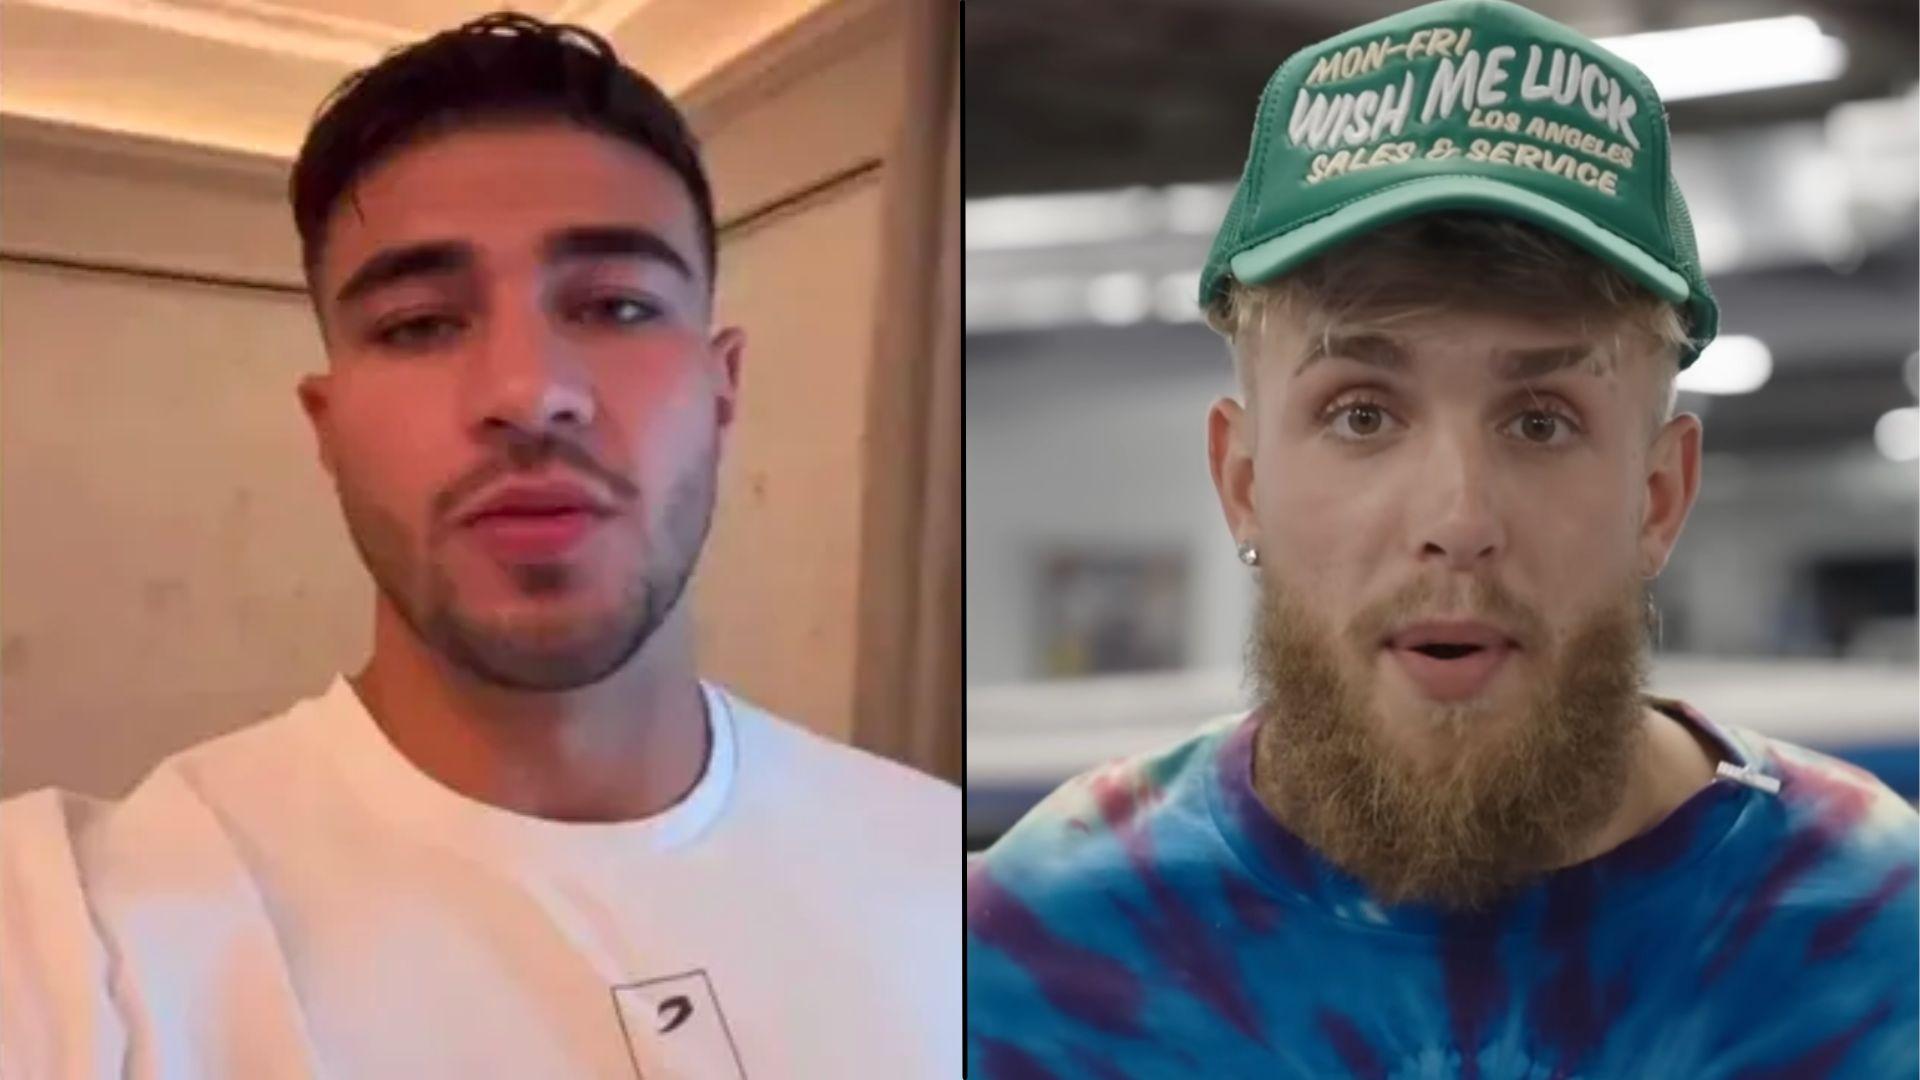 Tommy Fury in white shirt next to Jake paul in blue shirt and green hat talking to camera